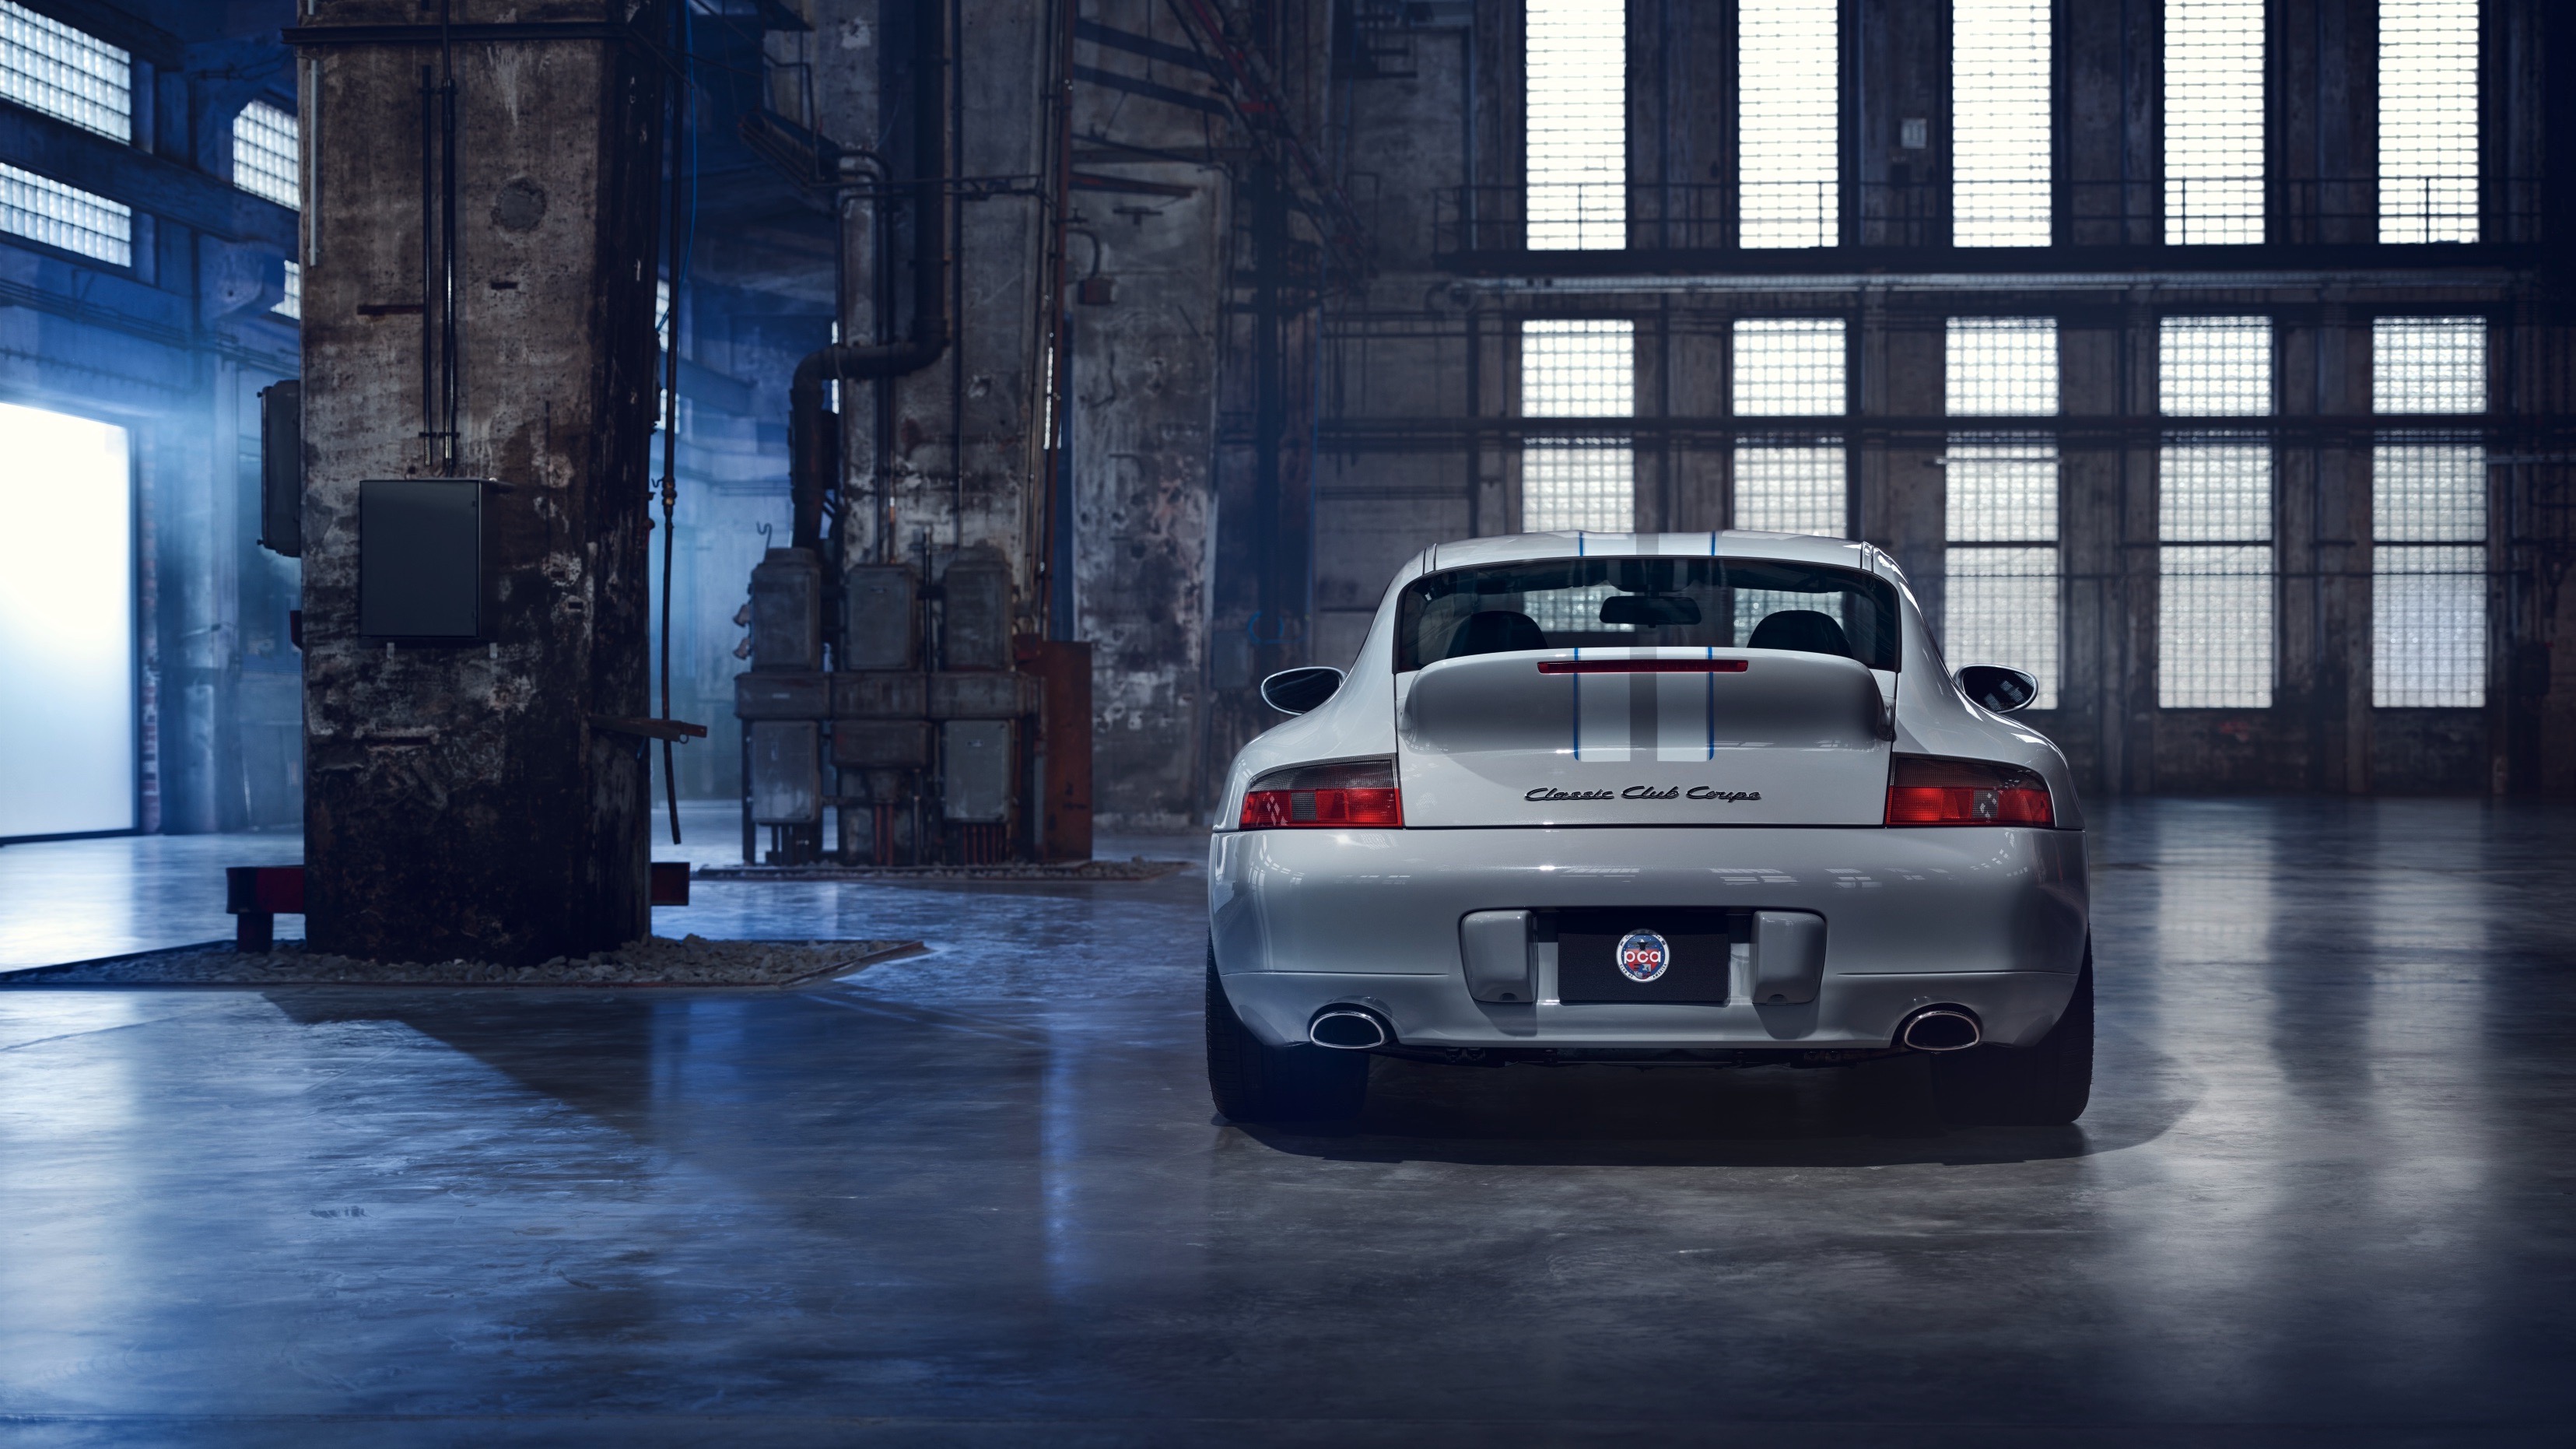 911 Classic Club Coupe rear view in industrial building scene